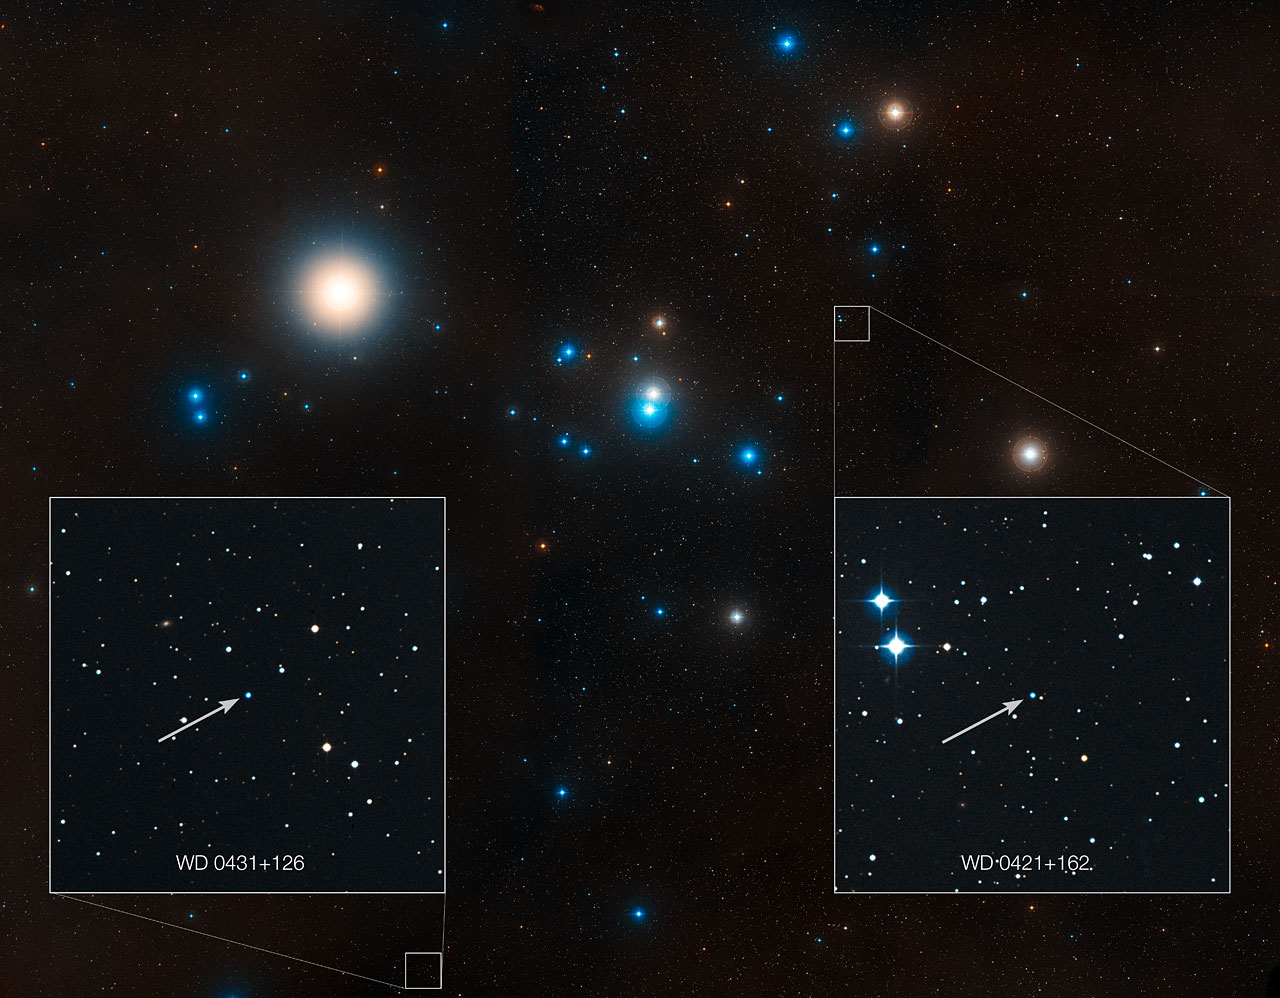 This image shows the region around the well-studied Hyades star cluster, the closest open cluster to Earth.